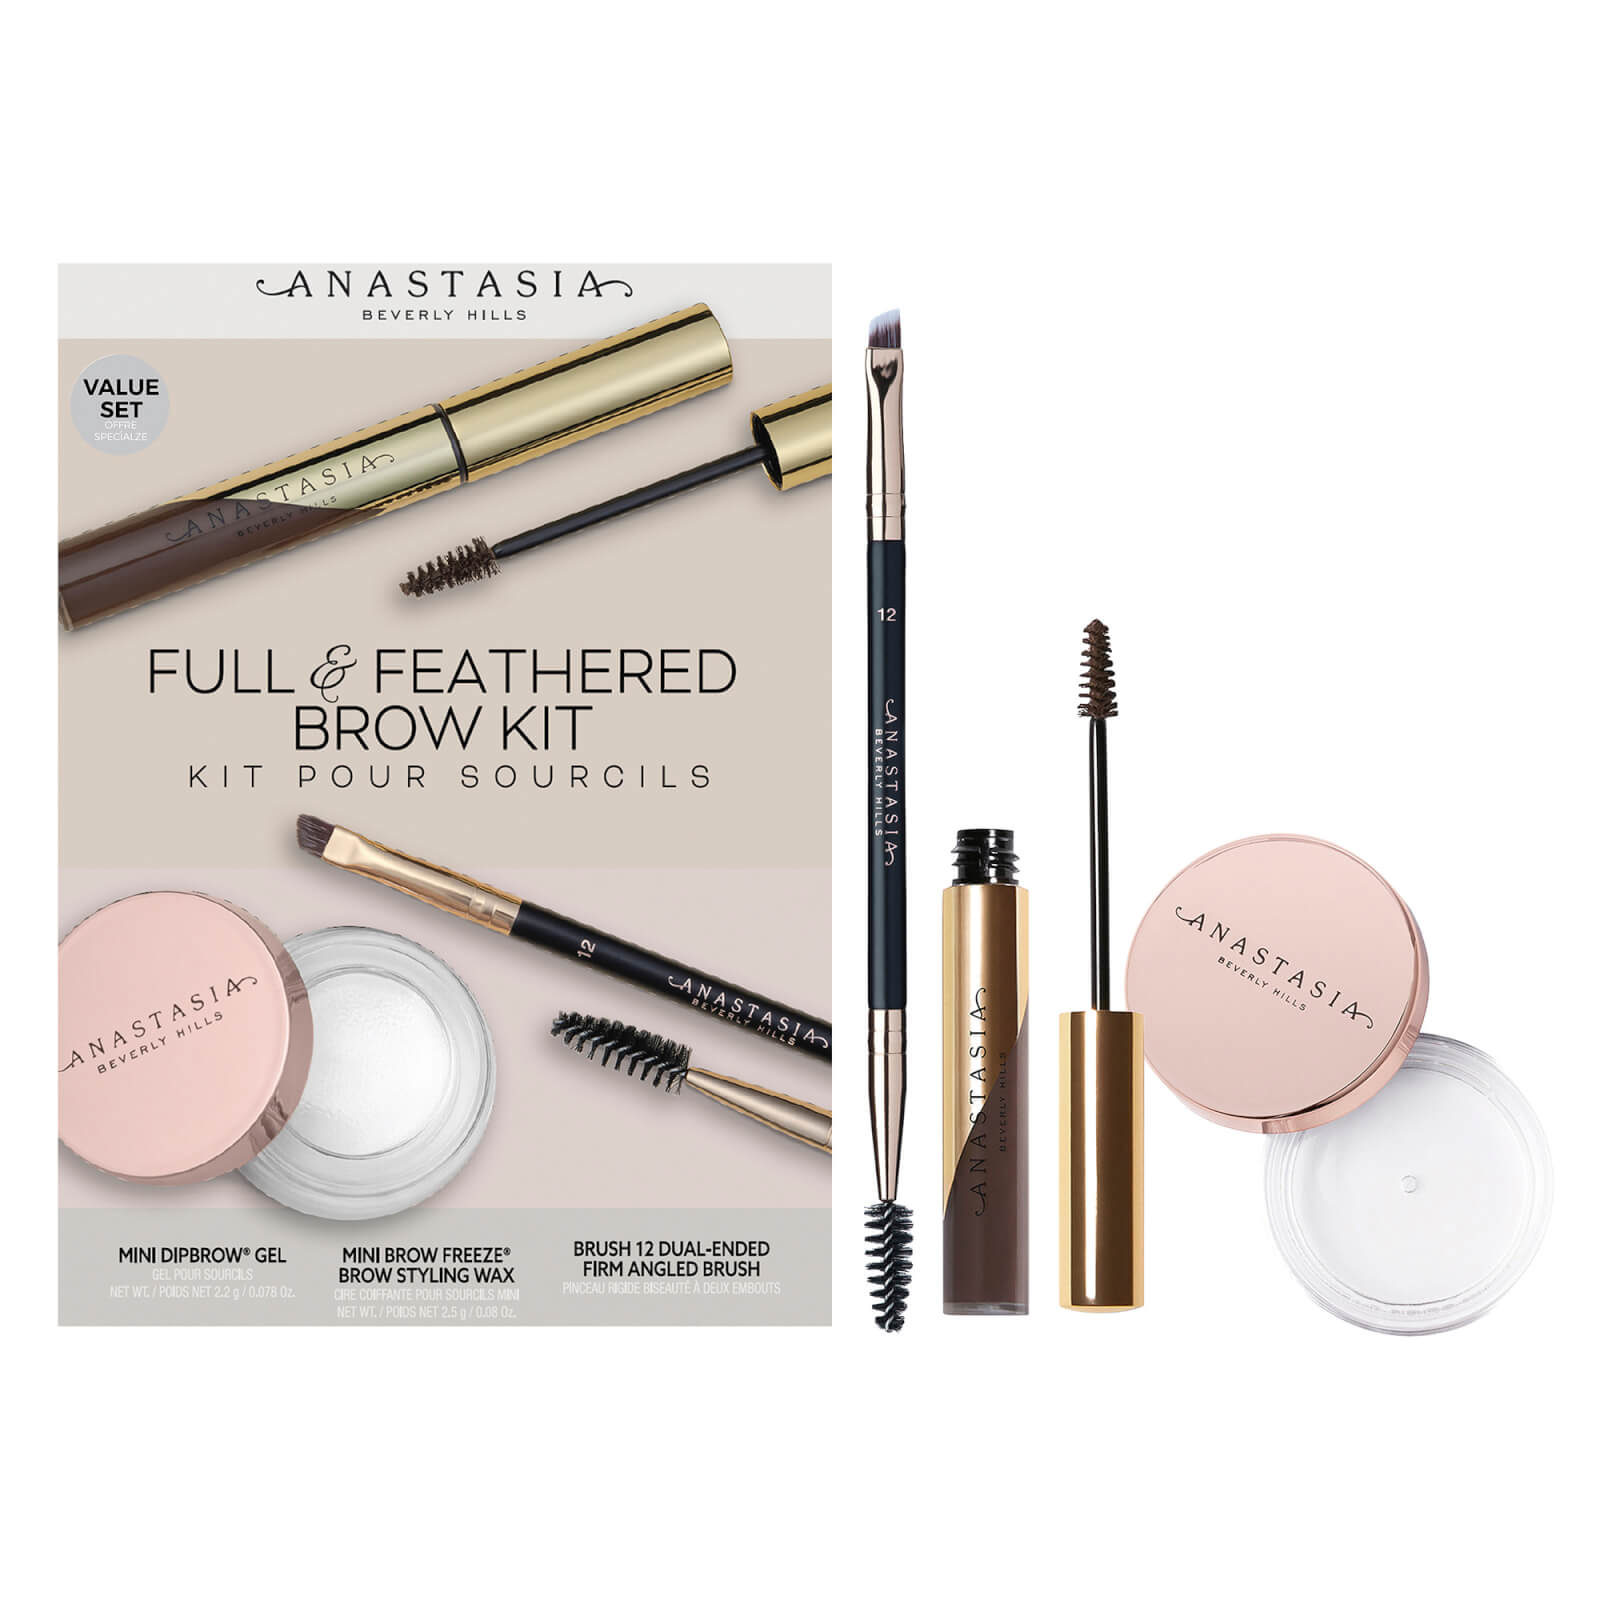 Anastasia Beverly Hills Full & Feathered Brow Kit - Dark Brown von Anastasia Beverly Hills